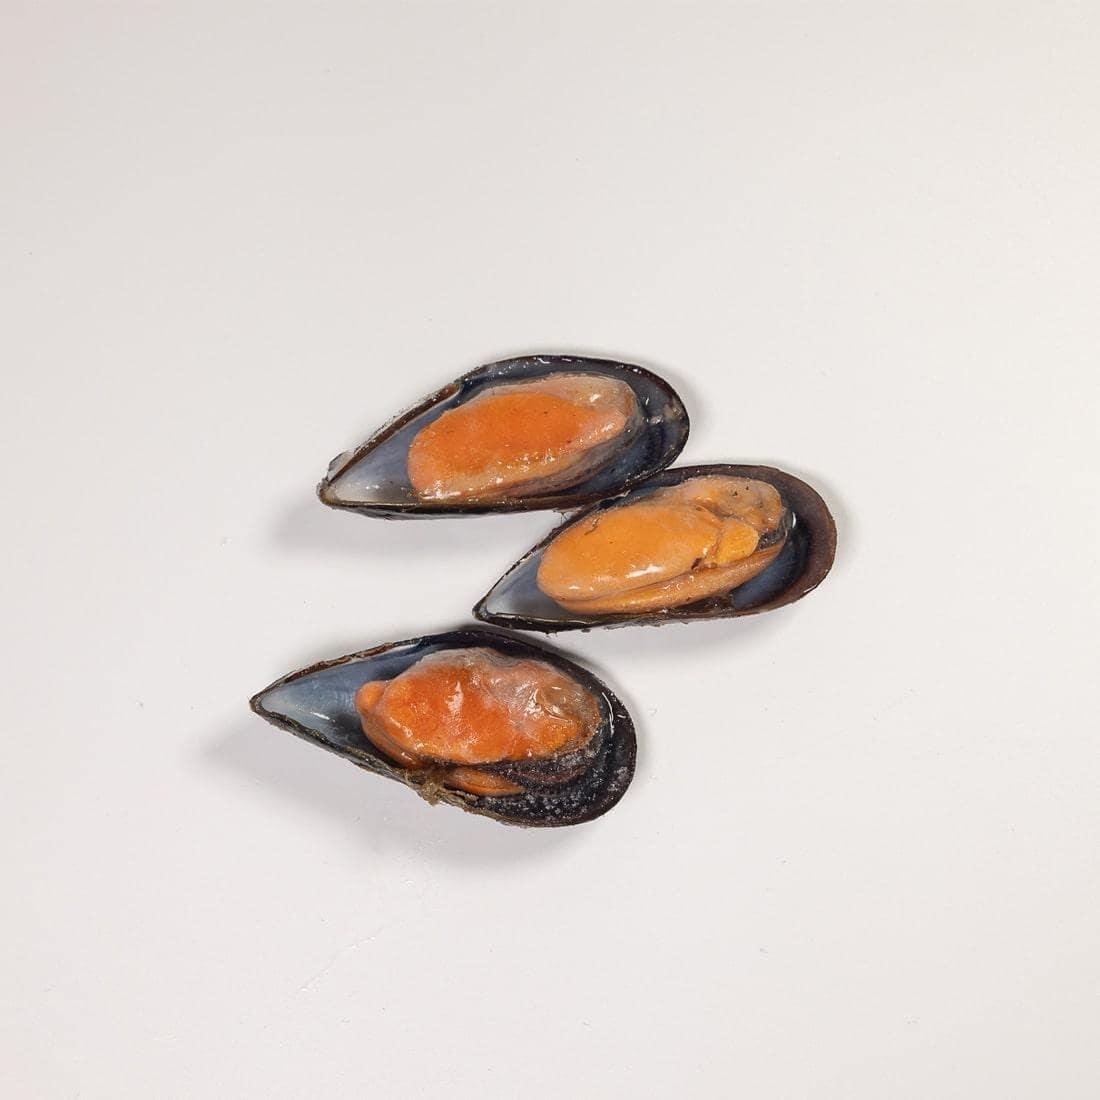 Image 0 of Half-shell mussels